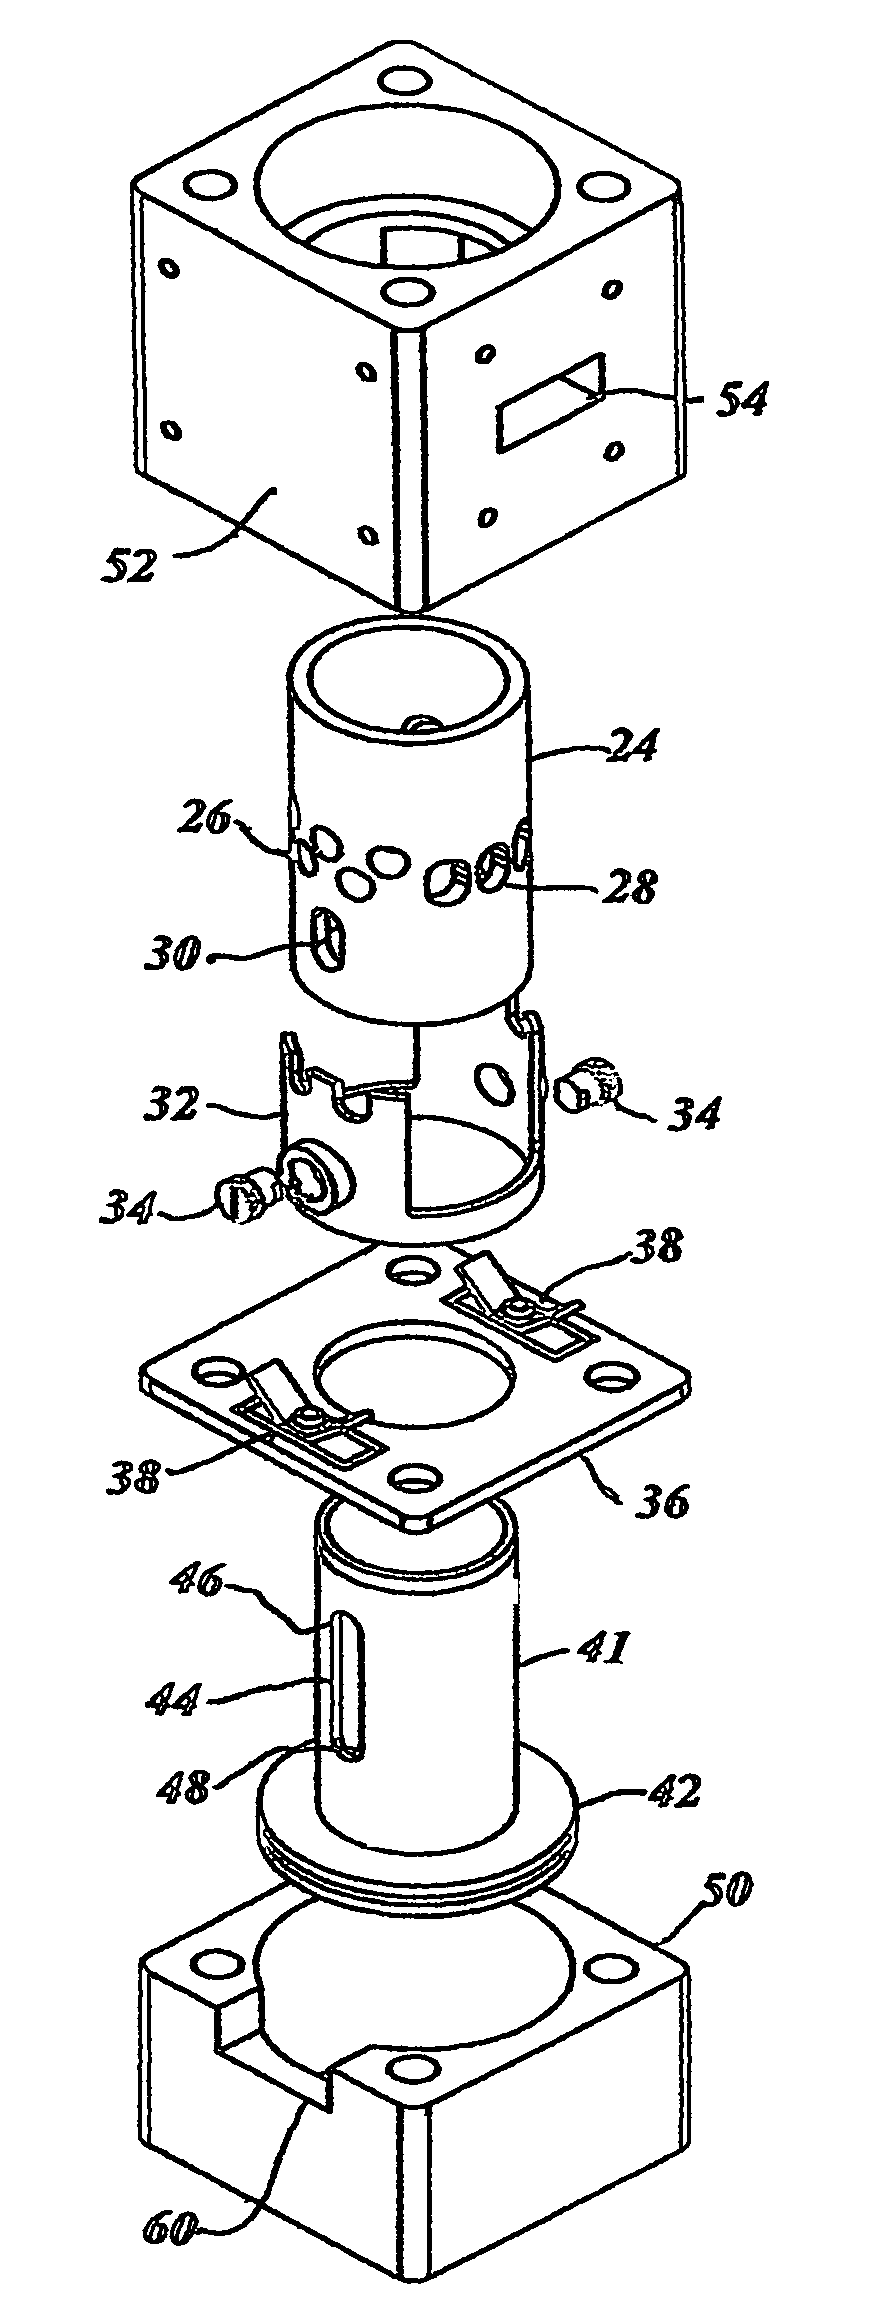 Supercharged two-cycle engines employing novel single element reciprocating shuttle inlet valve mechanisms and with a variable compression ratio